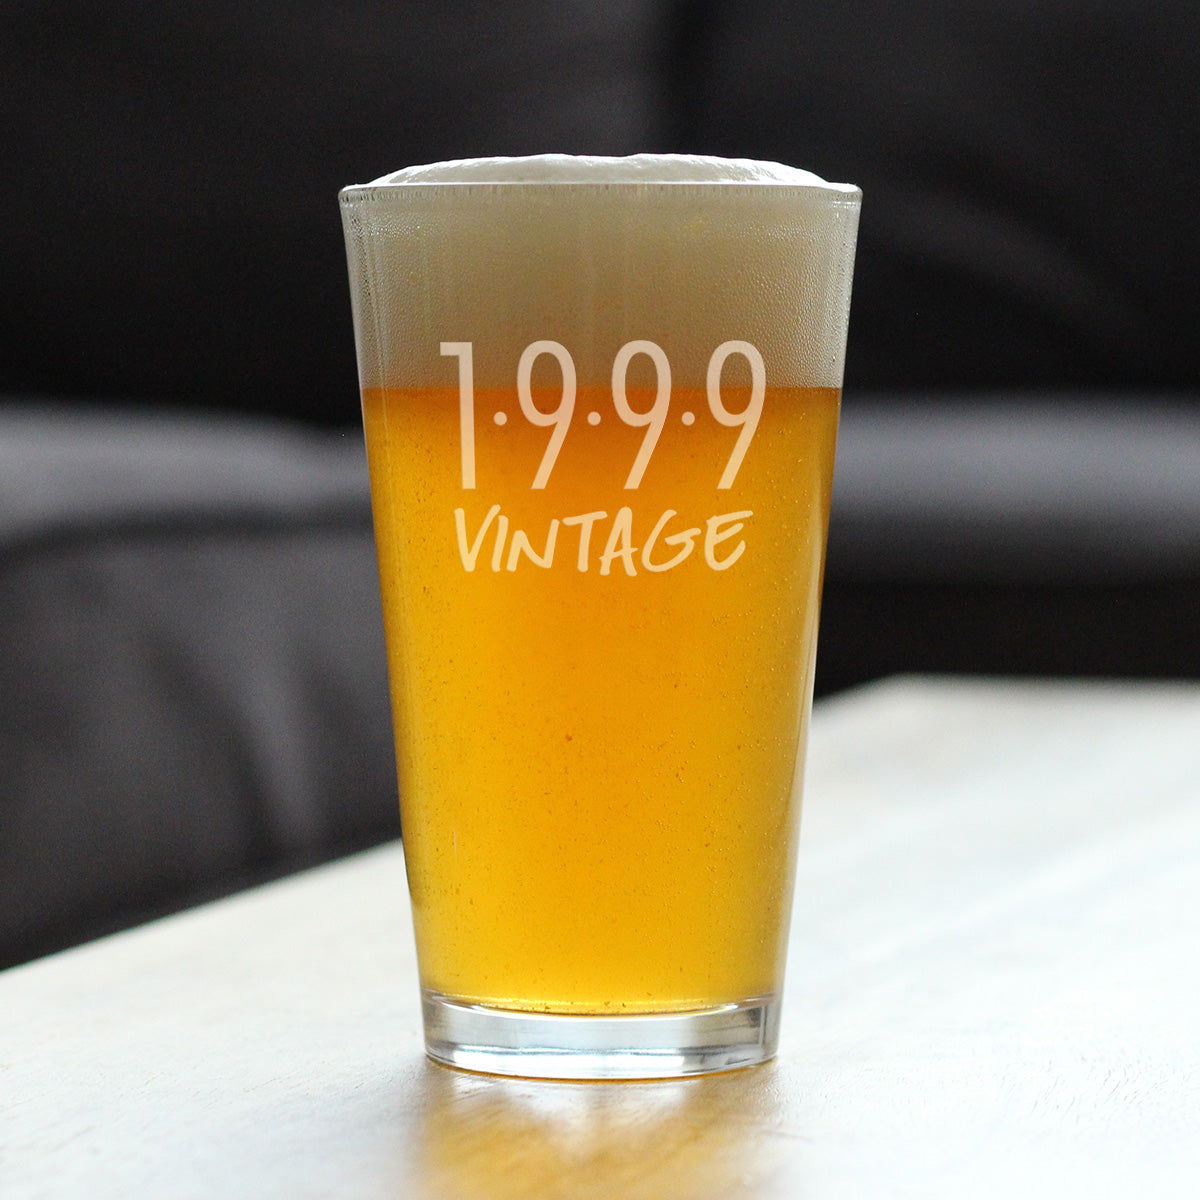 Vintage 1999 - Pint Glass for Beer - 25th Birthday Gifts for Men or Women Turning 25 - Fun Bday Party Decor - 16 oz